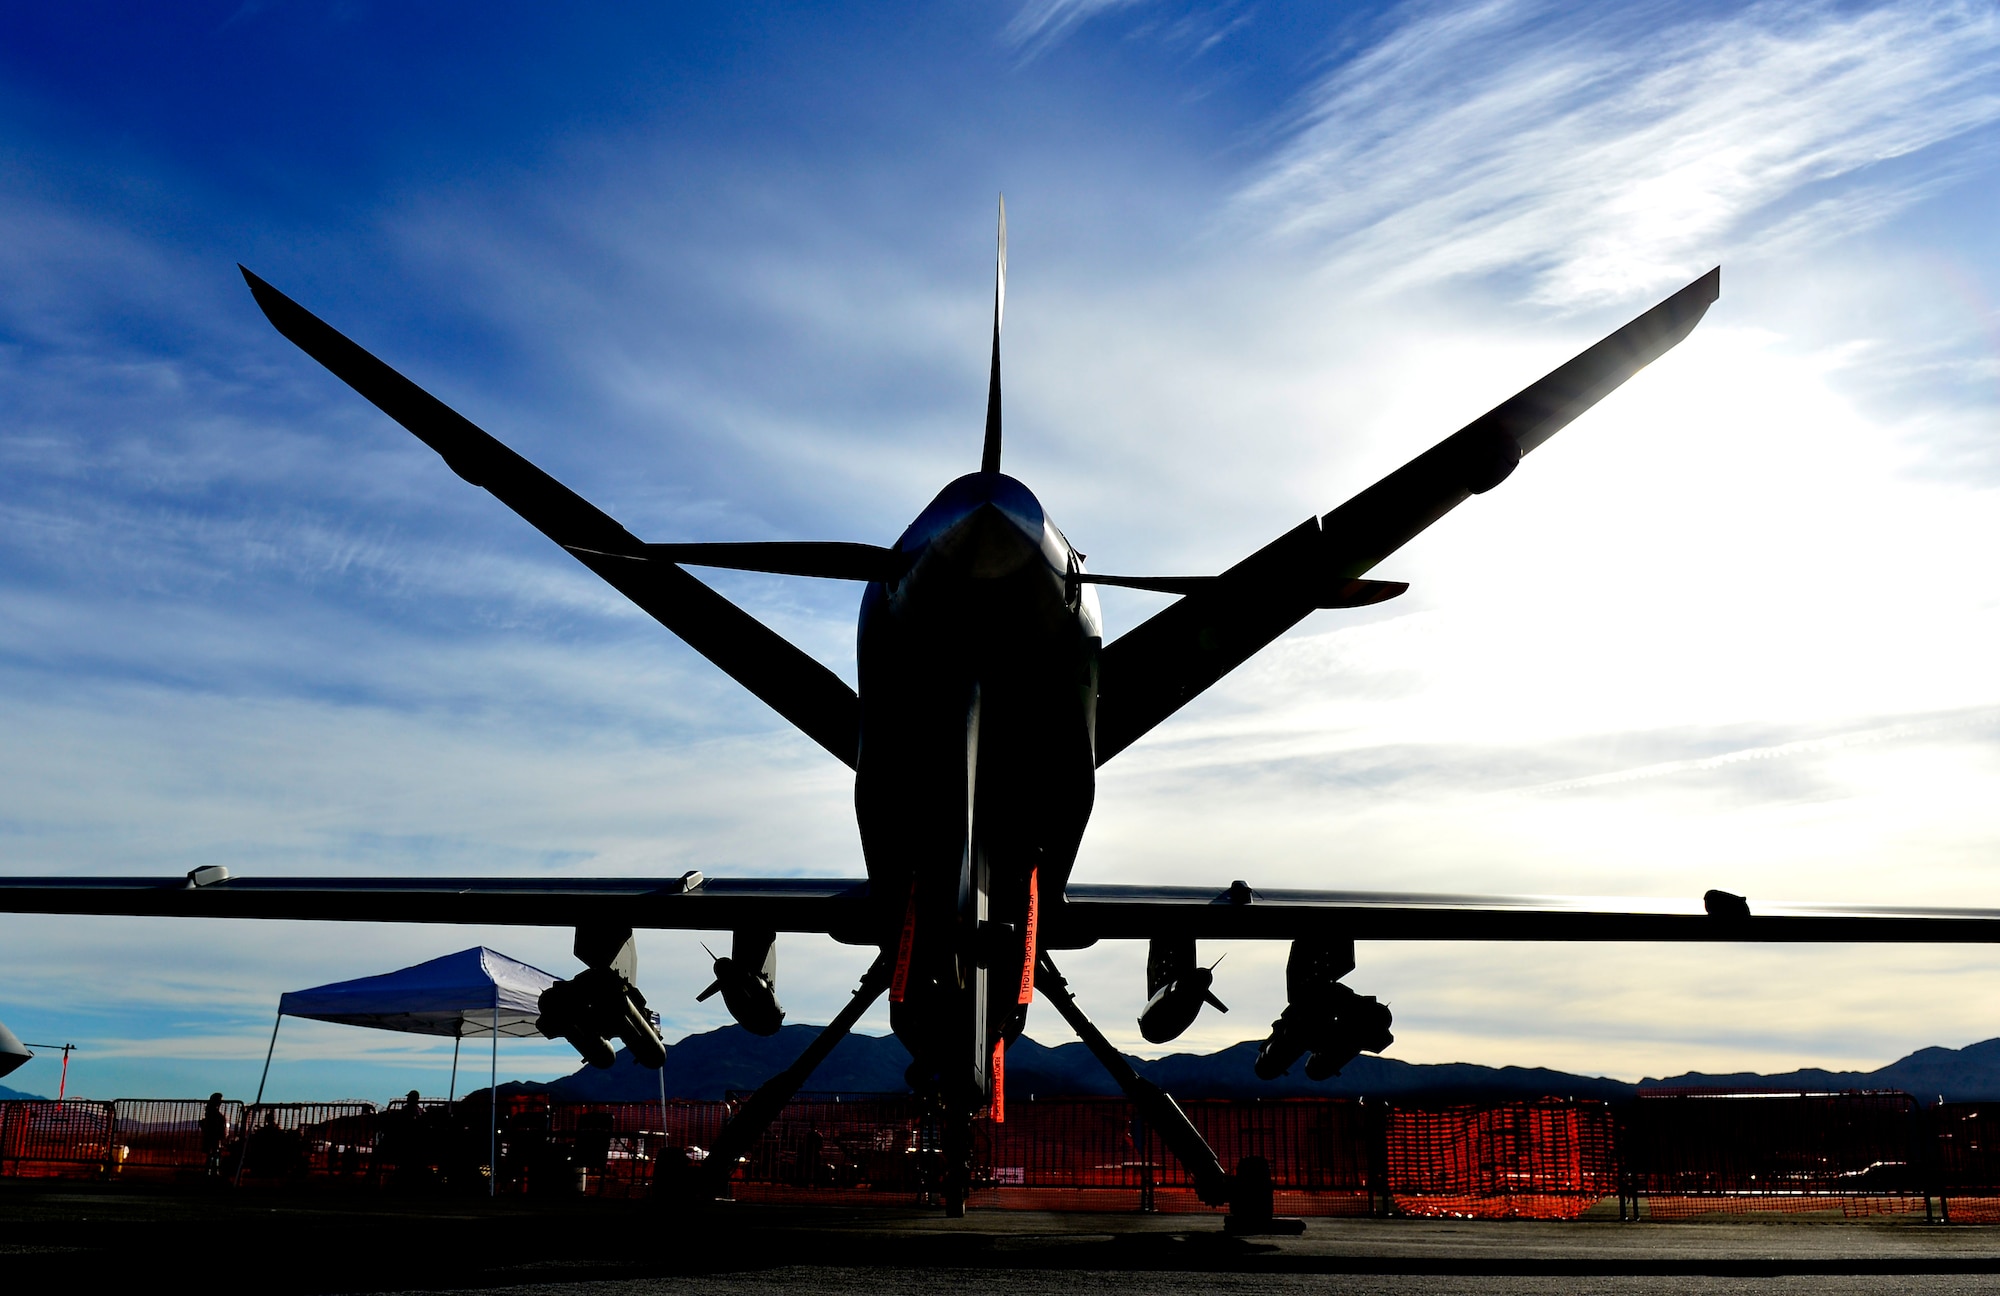 An MQ-9 Reaper sits on display during Aviation Nation Nov. 12, 2016, at Nellis Air Force Base, Nevada. An MQ-9 Reaper and MQ-1 Predator were displayed at the air show. The MQ-1 and MQ-9 are both medium-altitude, long-endurance remotely piloted aircraft capable of supporting persistent attack and reconnaissance in support of global contingency operations. (U.S. Air Force photo by Senior Airman Christian Clausen/Released)